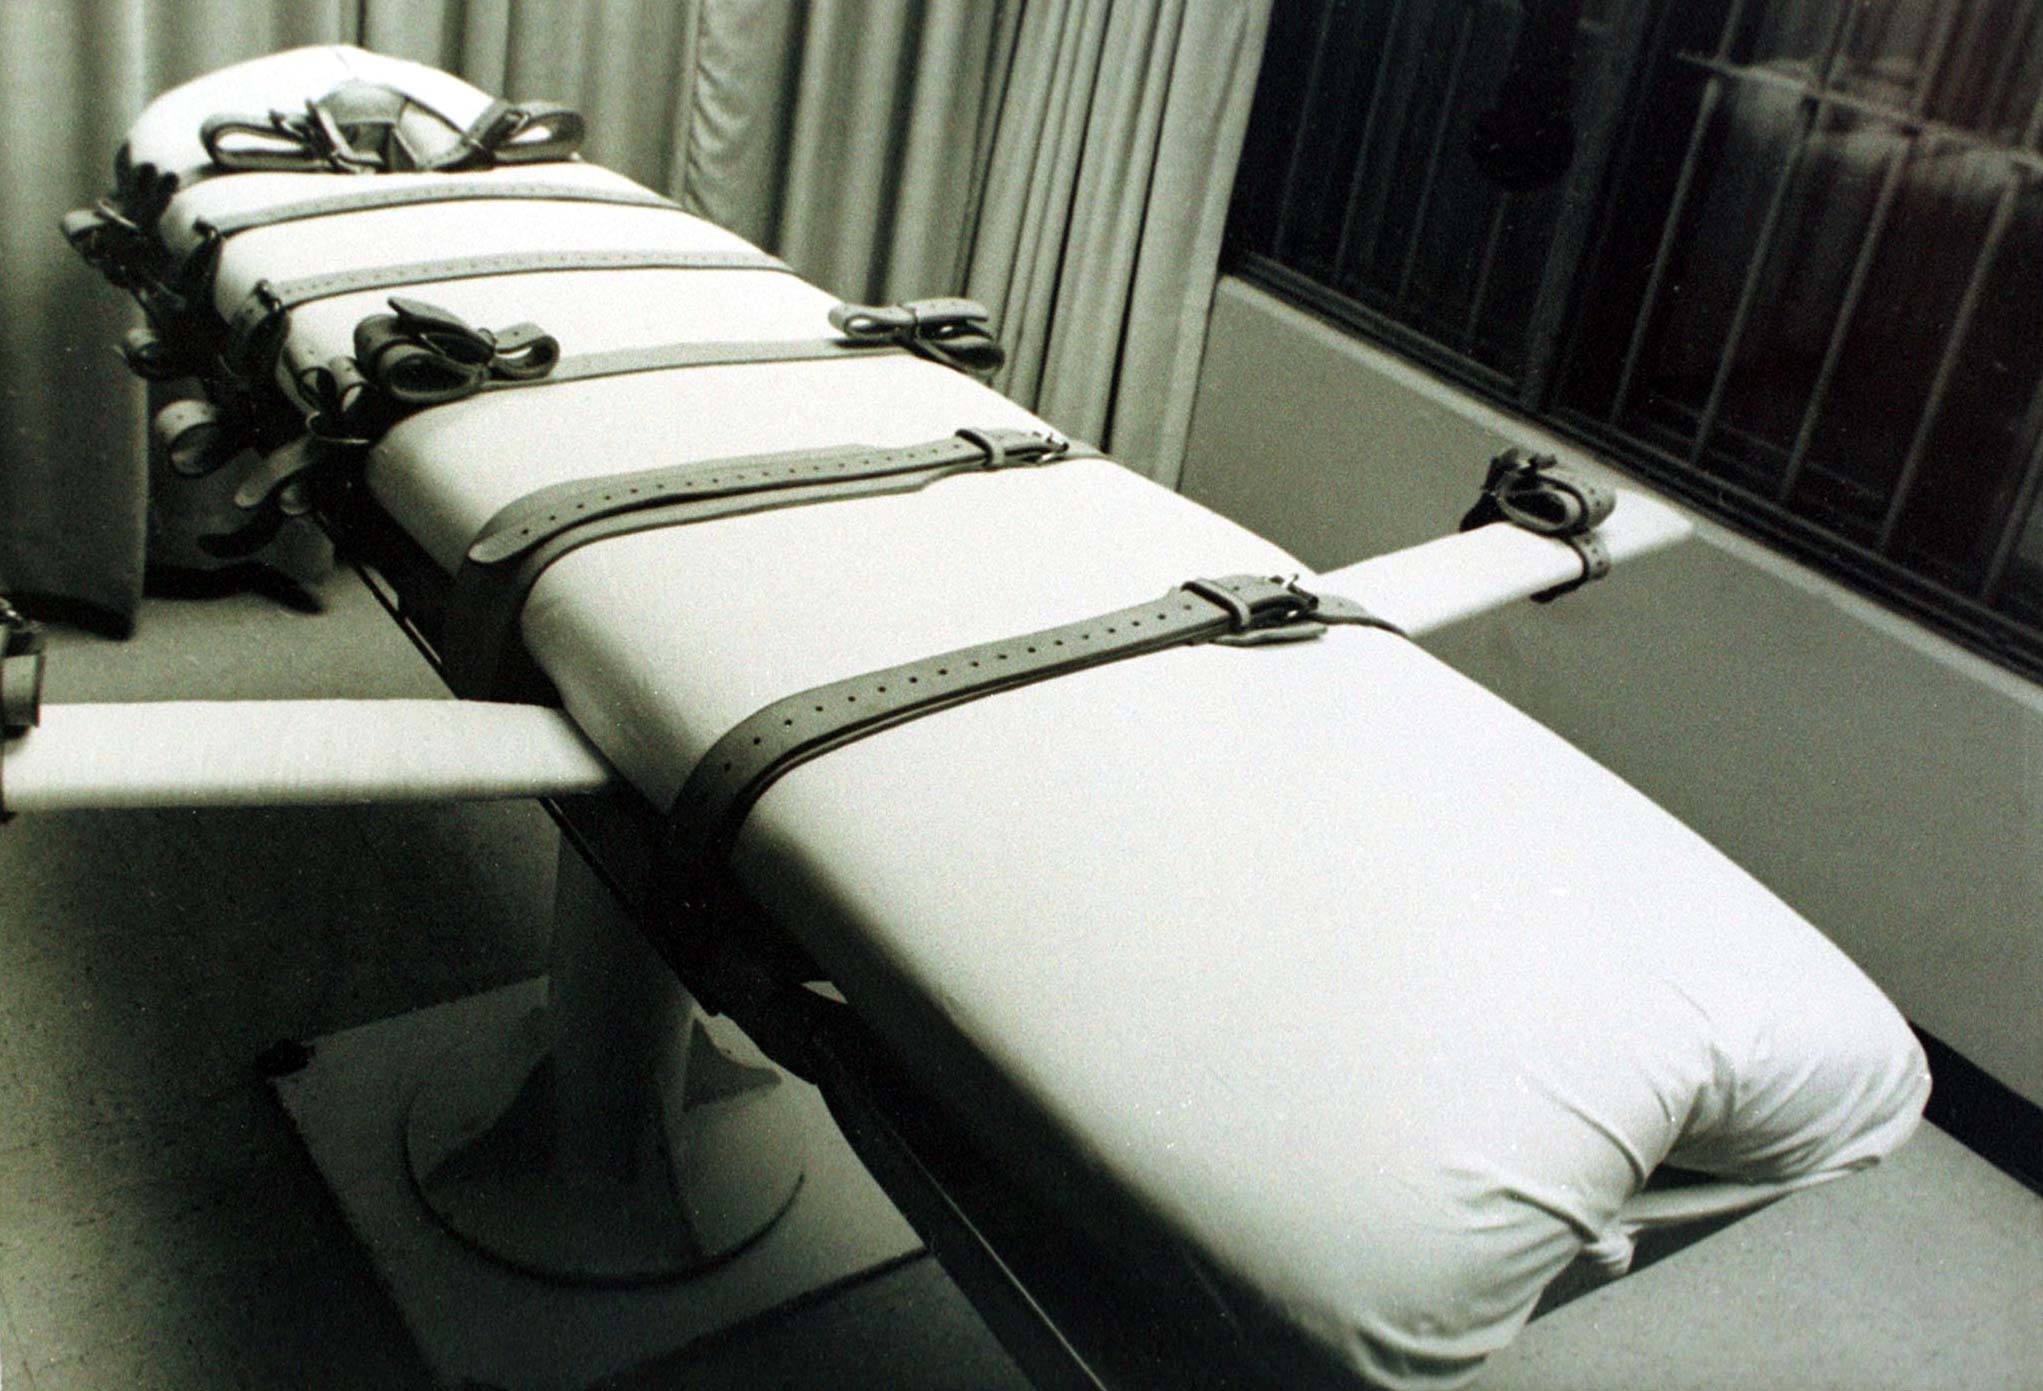 The execution gurney in the Walls Unit in Huntsville, Texas has seen more inmates executed by lethal injection than almost all of the other states combined. (Reuters)